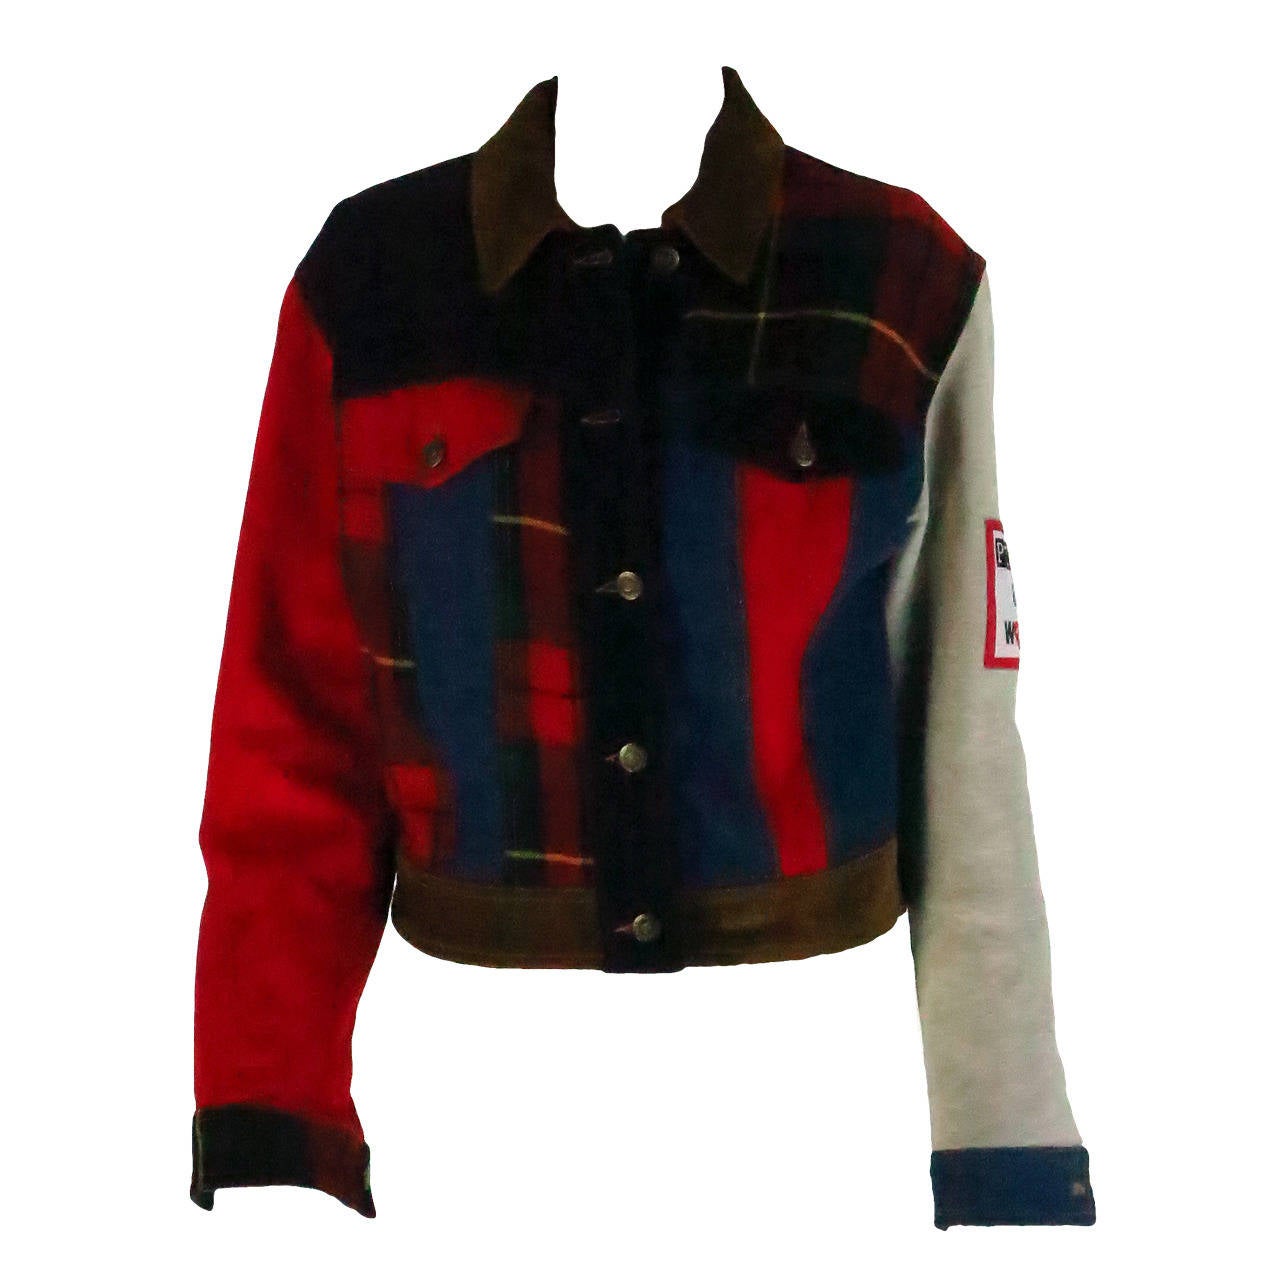 Moschino mixed fabric "Patch & Work" western style jacket